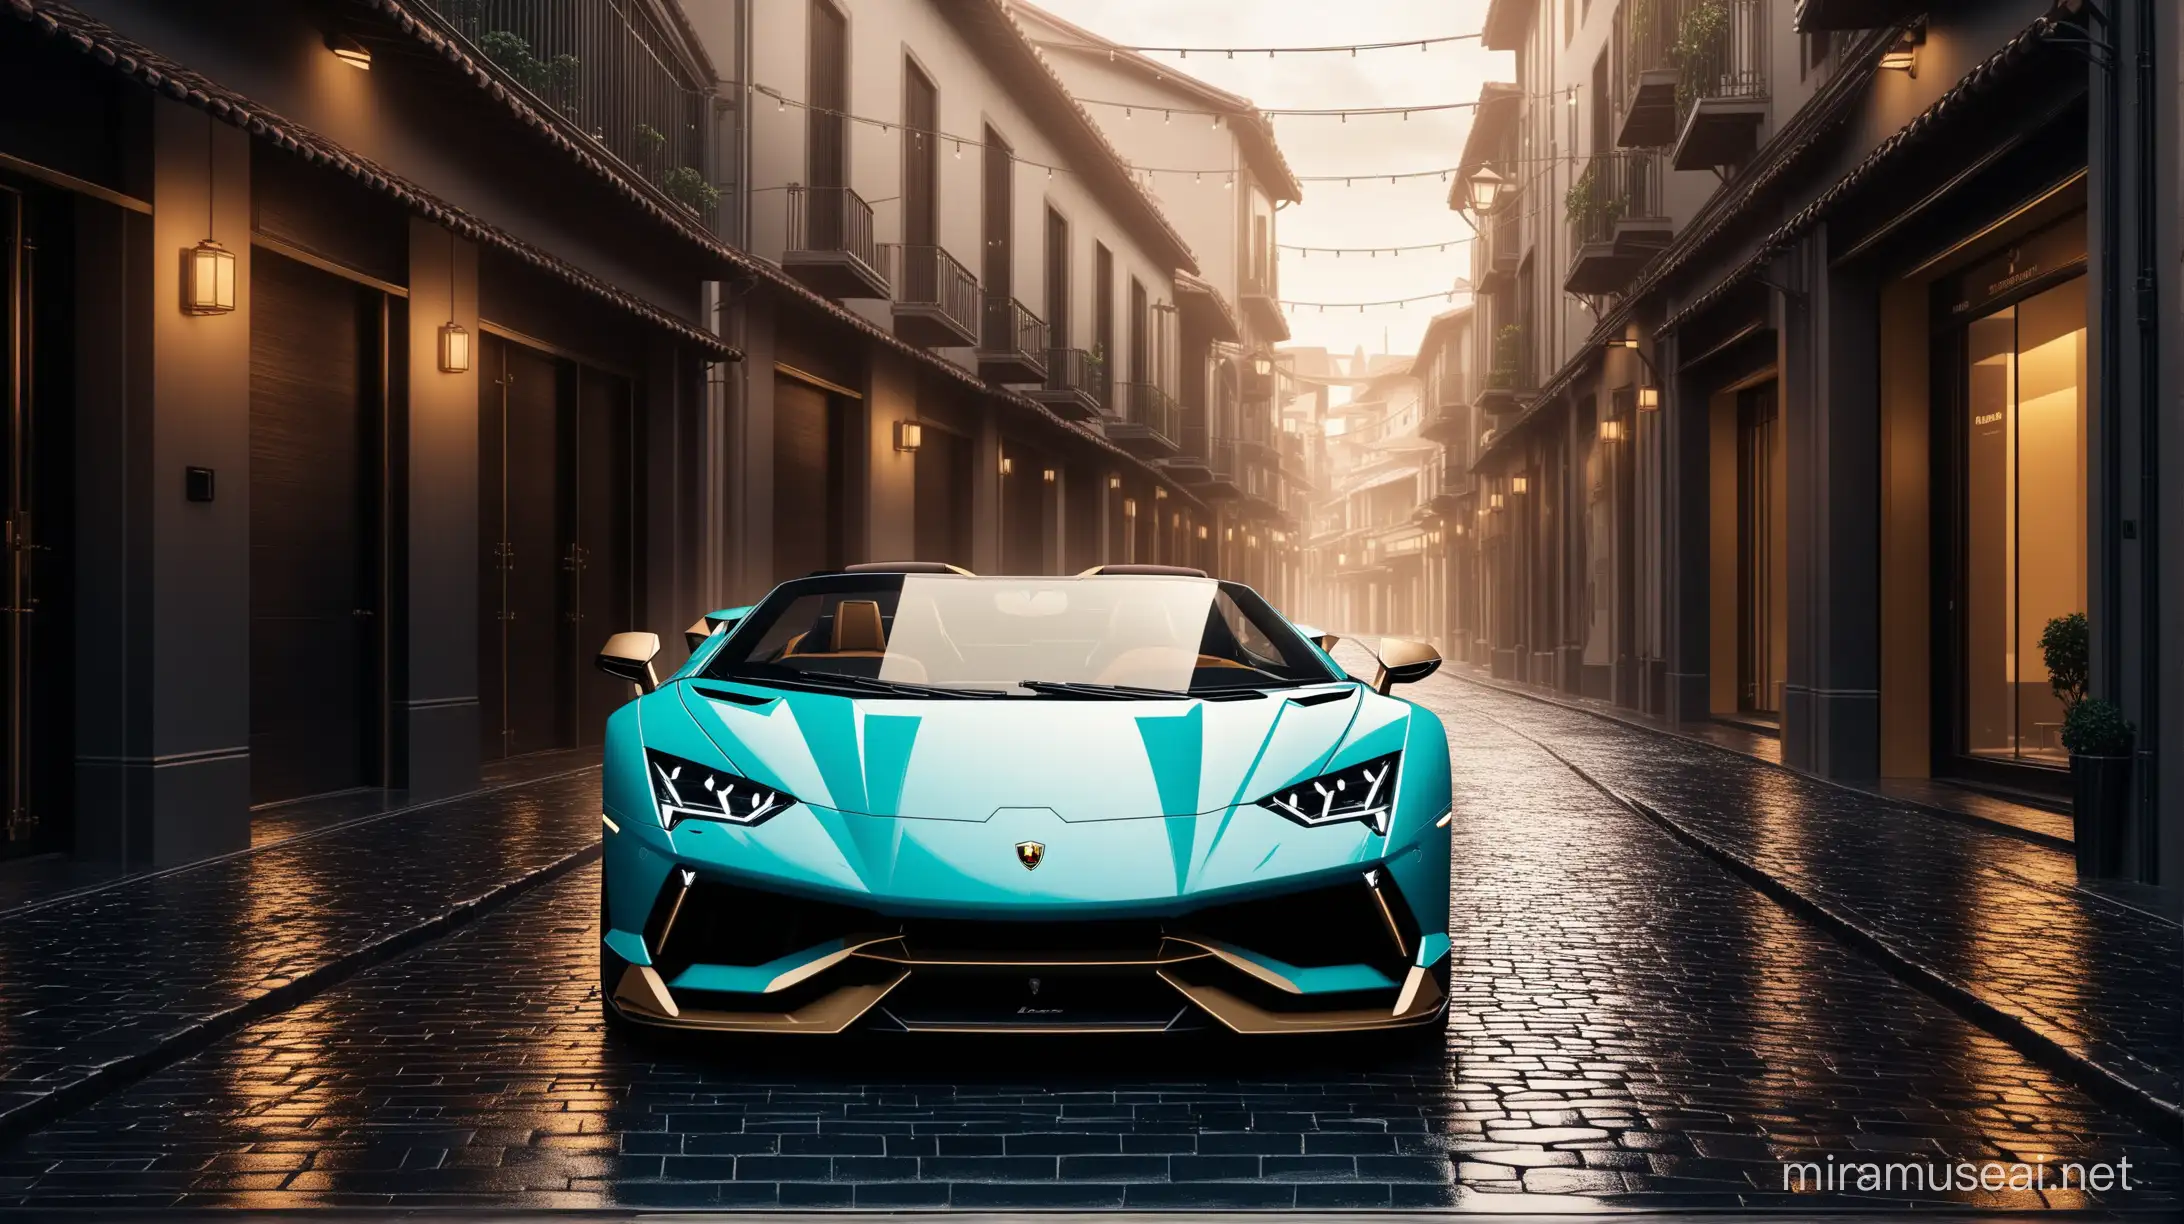 A stunning 4K cinematic photograph of a Lamborghini Sian Roadster in a luxury alleyway, featuring yellow lines. The exclusive vehicle is parked in front of upscale stores, one of which displays a round,  "Be Real Bienes Raices" sign. The cobblestone pavement is wet from rain, capturing the essence of an upscale neighborhood. The high-contrast image boasts a 3D render quality ambiance.  cinematic poster., 